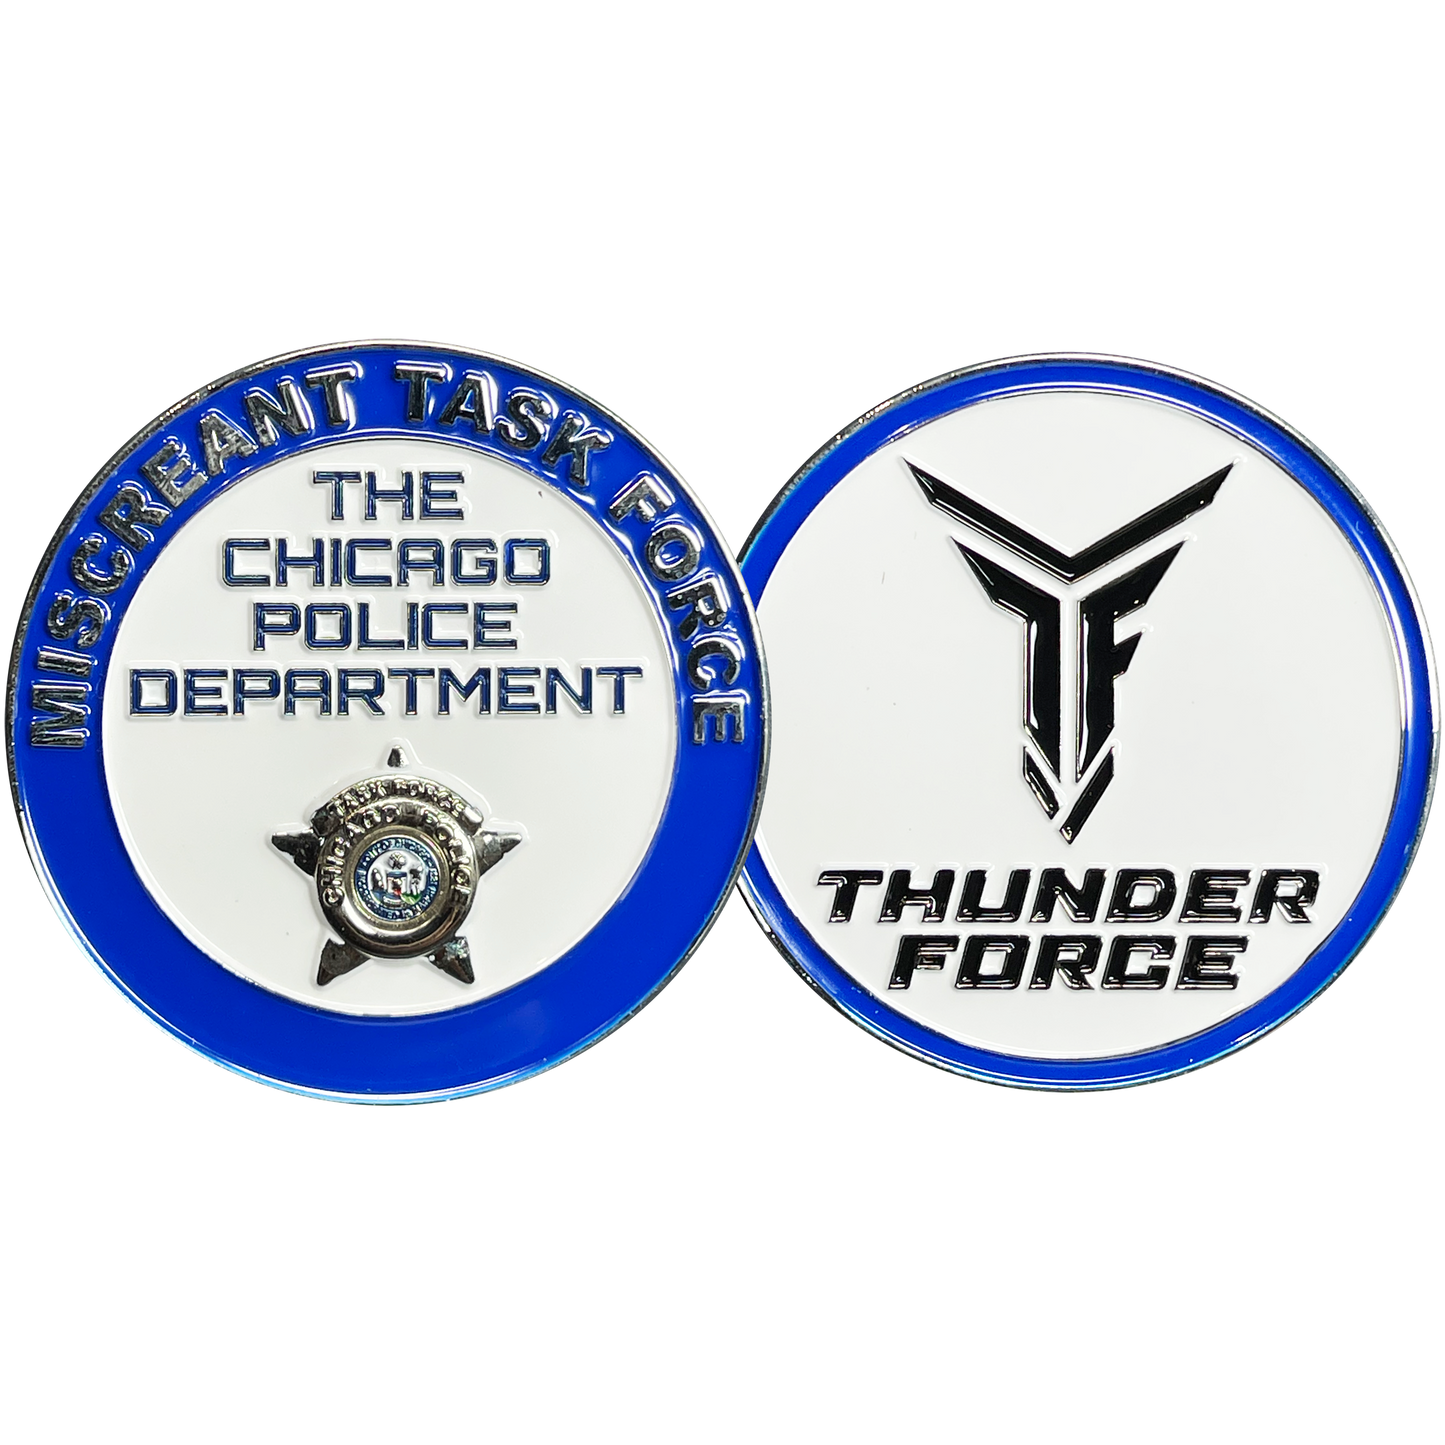 BL15-015 Chicago Police Department Miscreant Task Force Challenge Coin